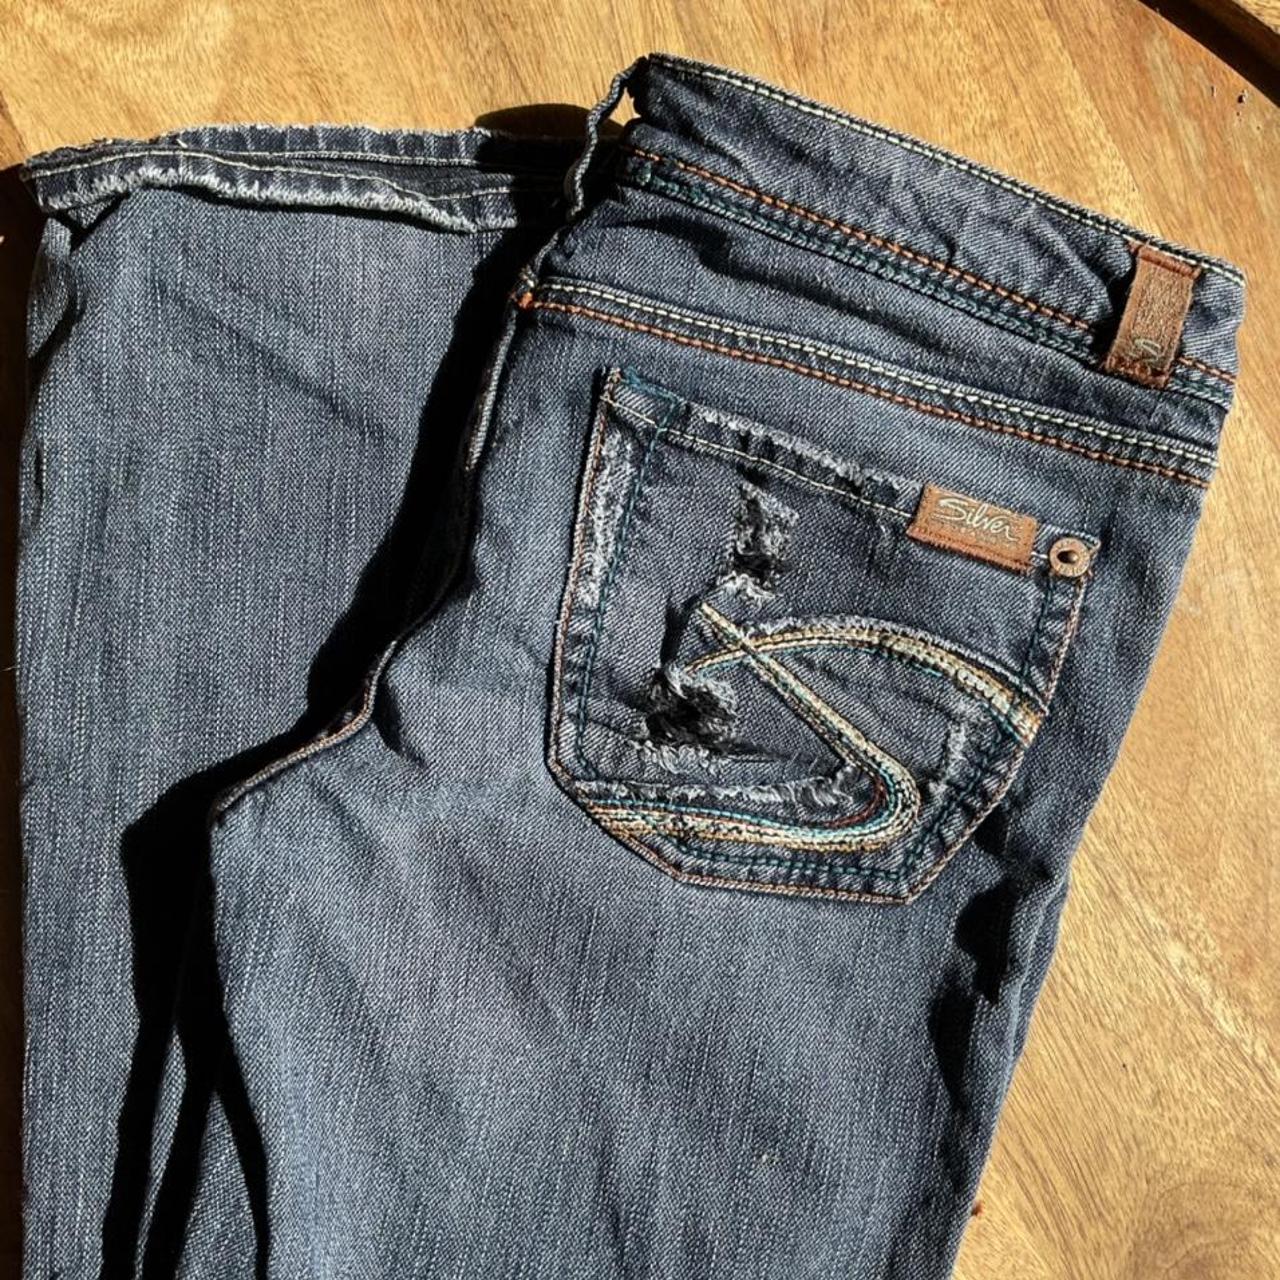 Low rise bootcut jeans from Silver Jean Co a Canada... Depop